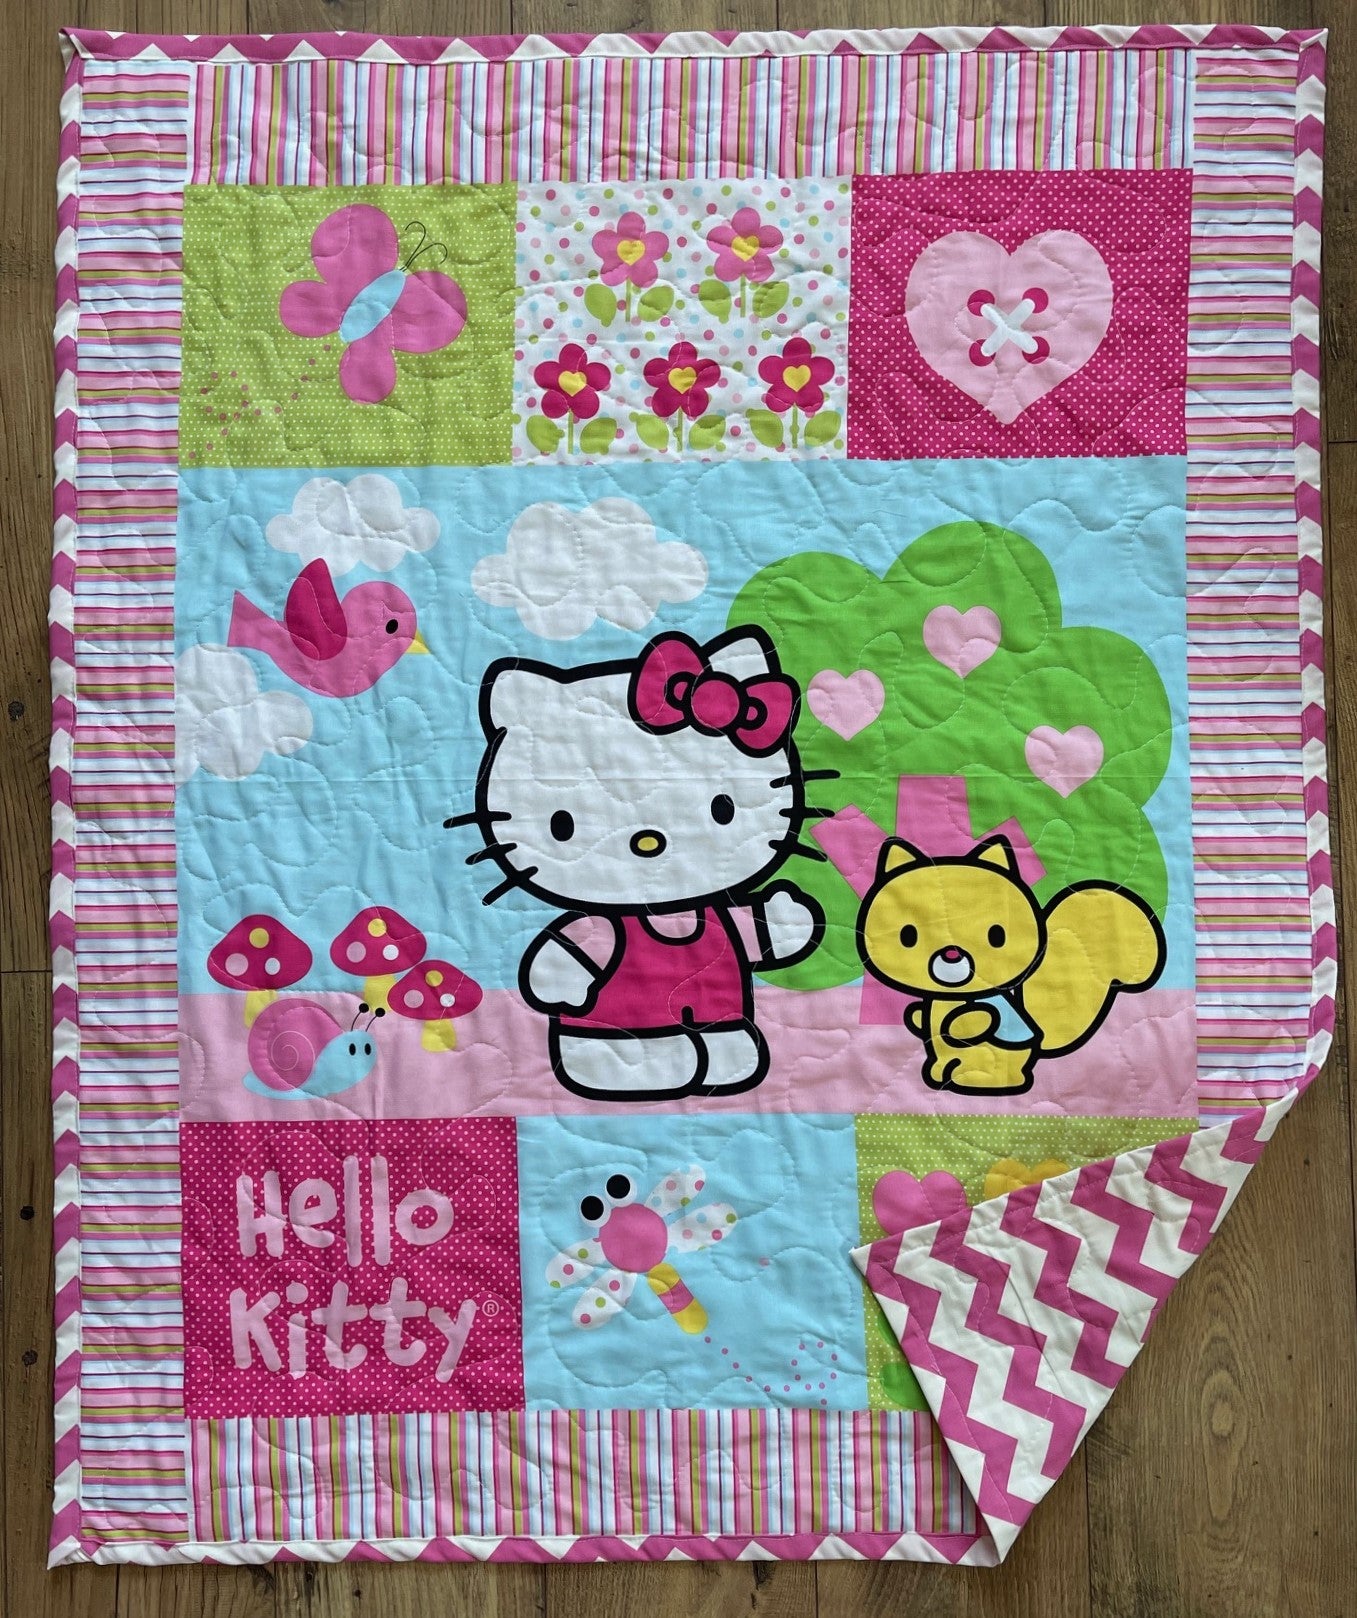 HELLO KITTY & LORRY SQUIRREL GARDEN FLOWERS INSPIRED QUILTED BLANKET